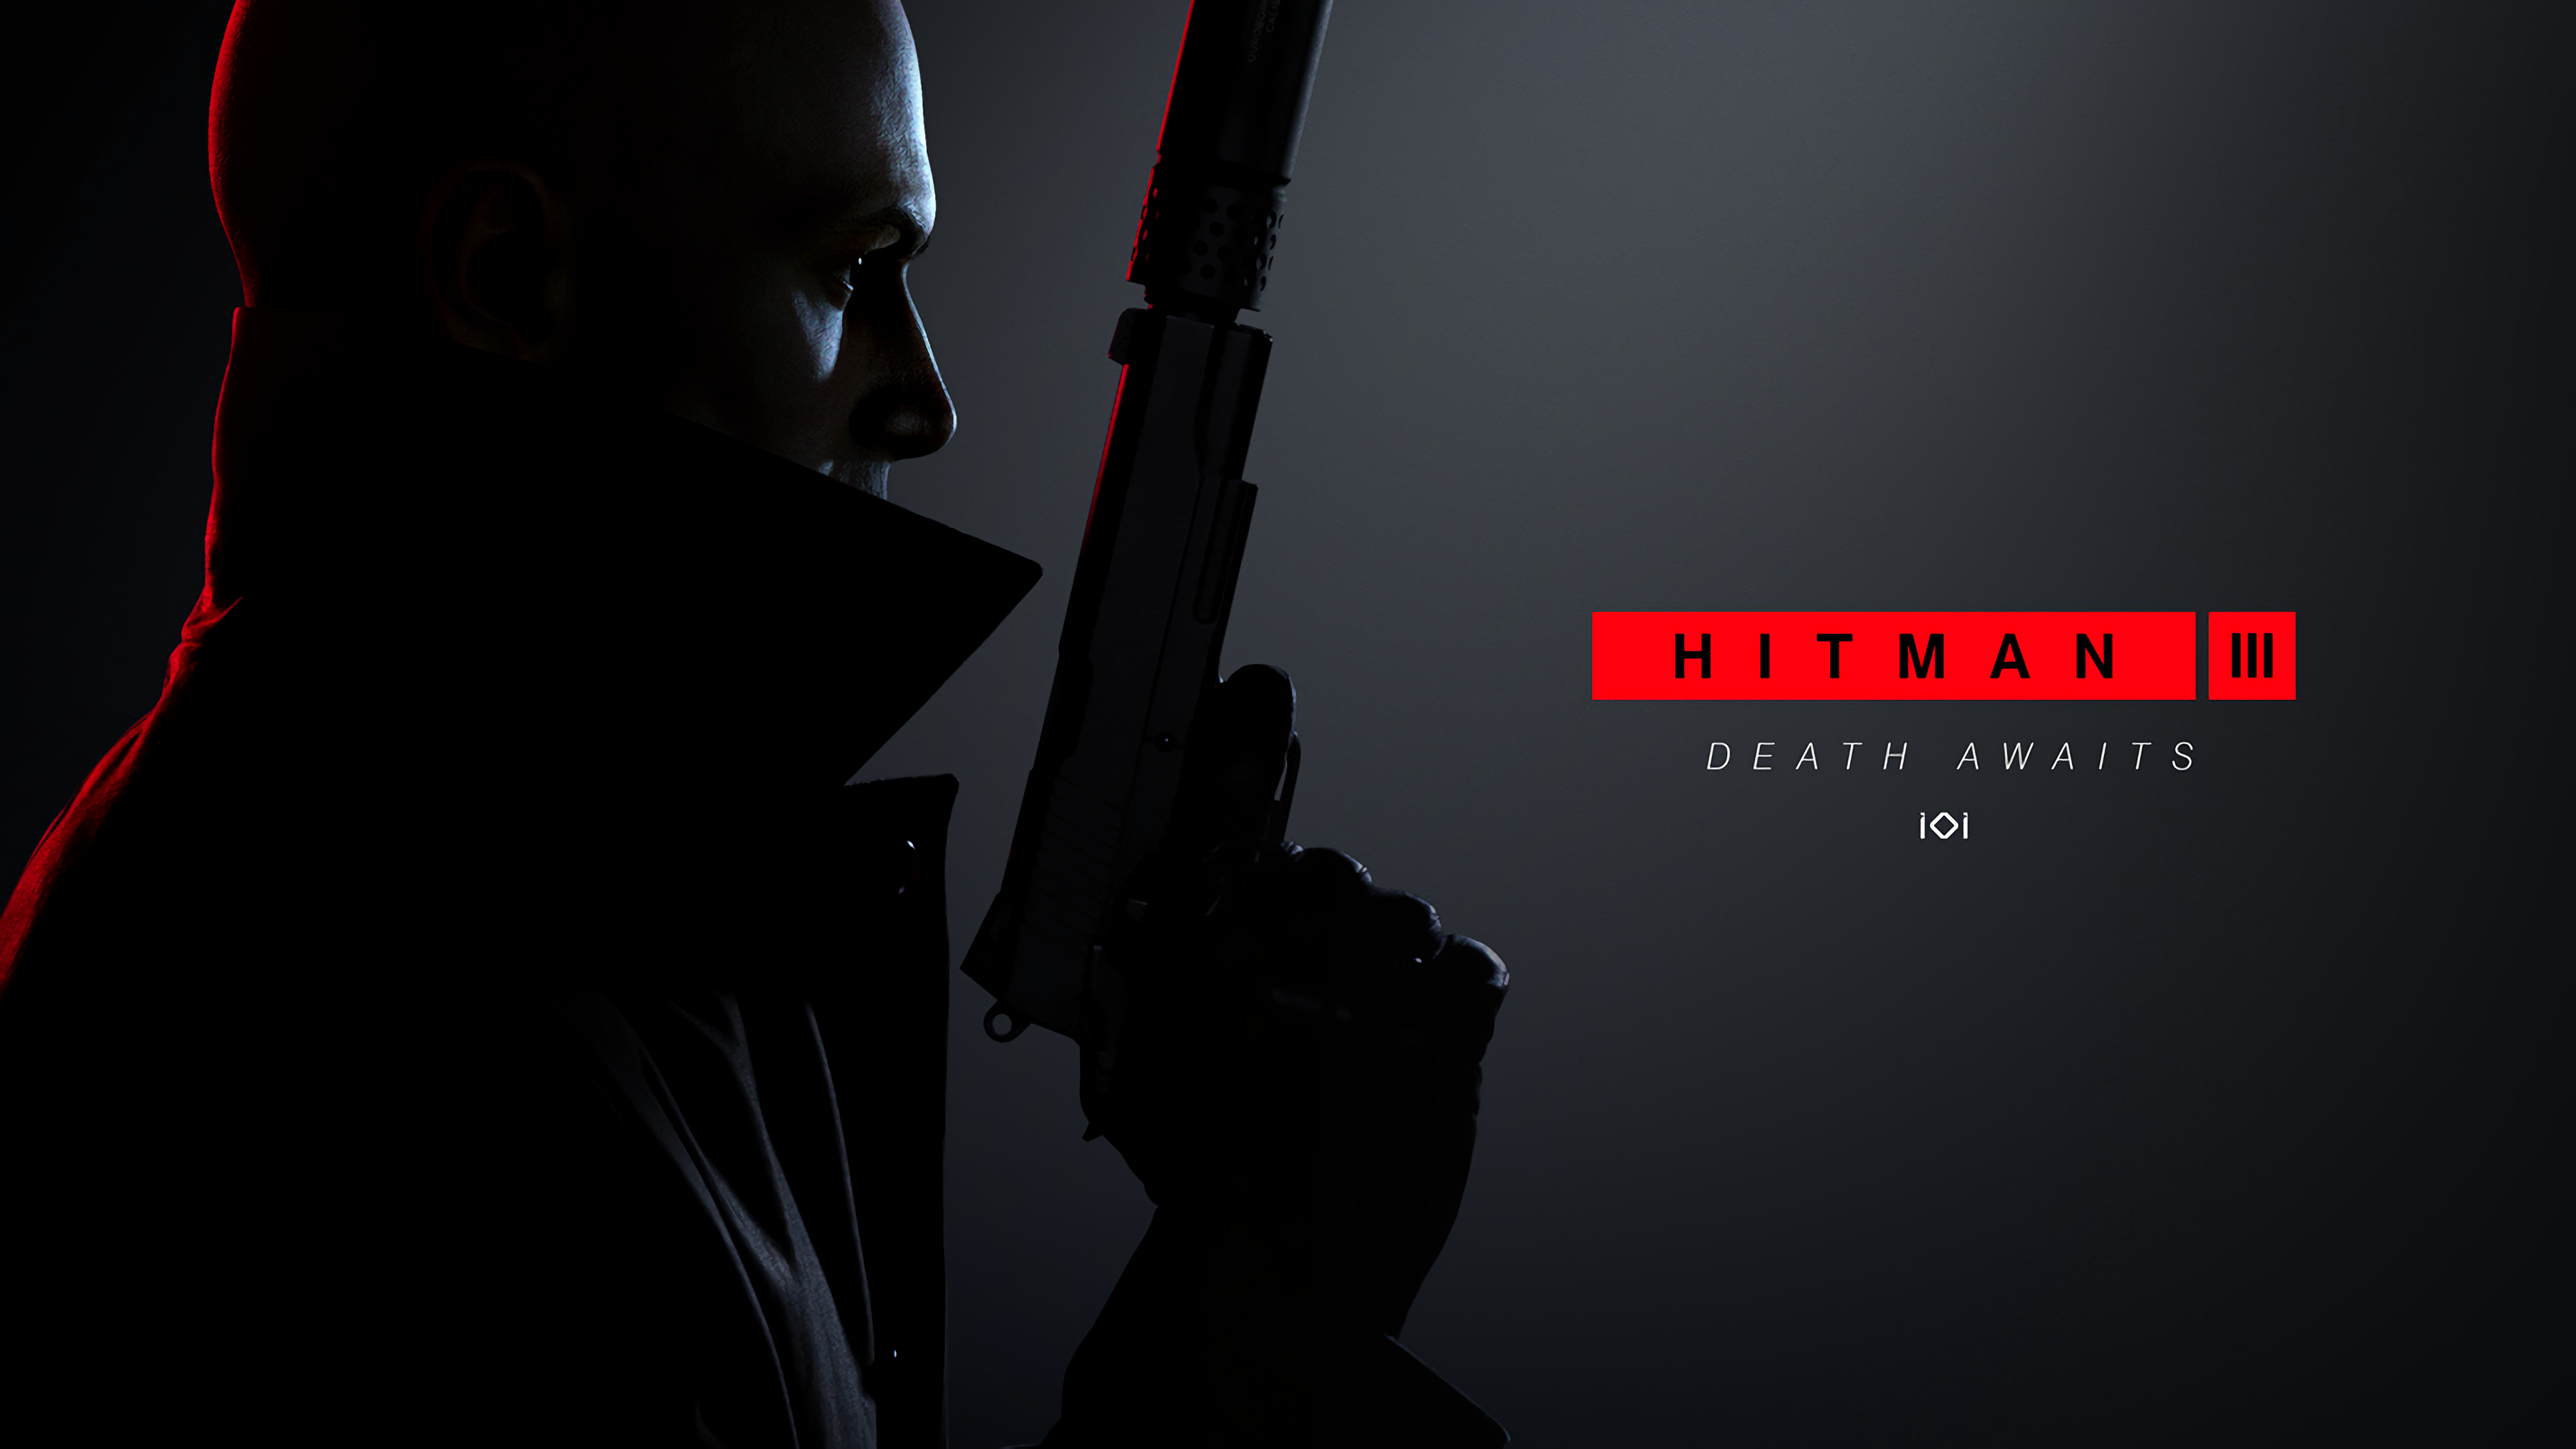 Edited hitman wallpapers for different resolutions with and wo logo rhitman